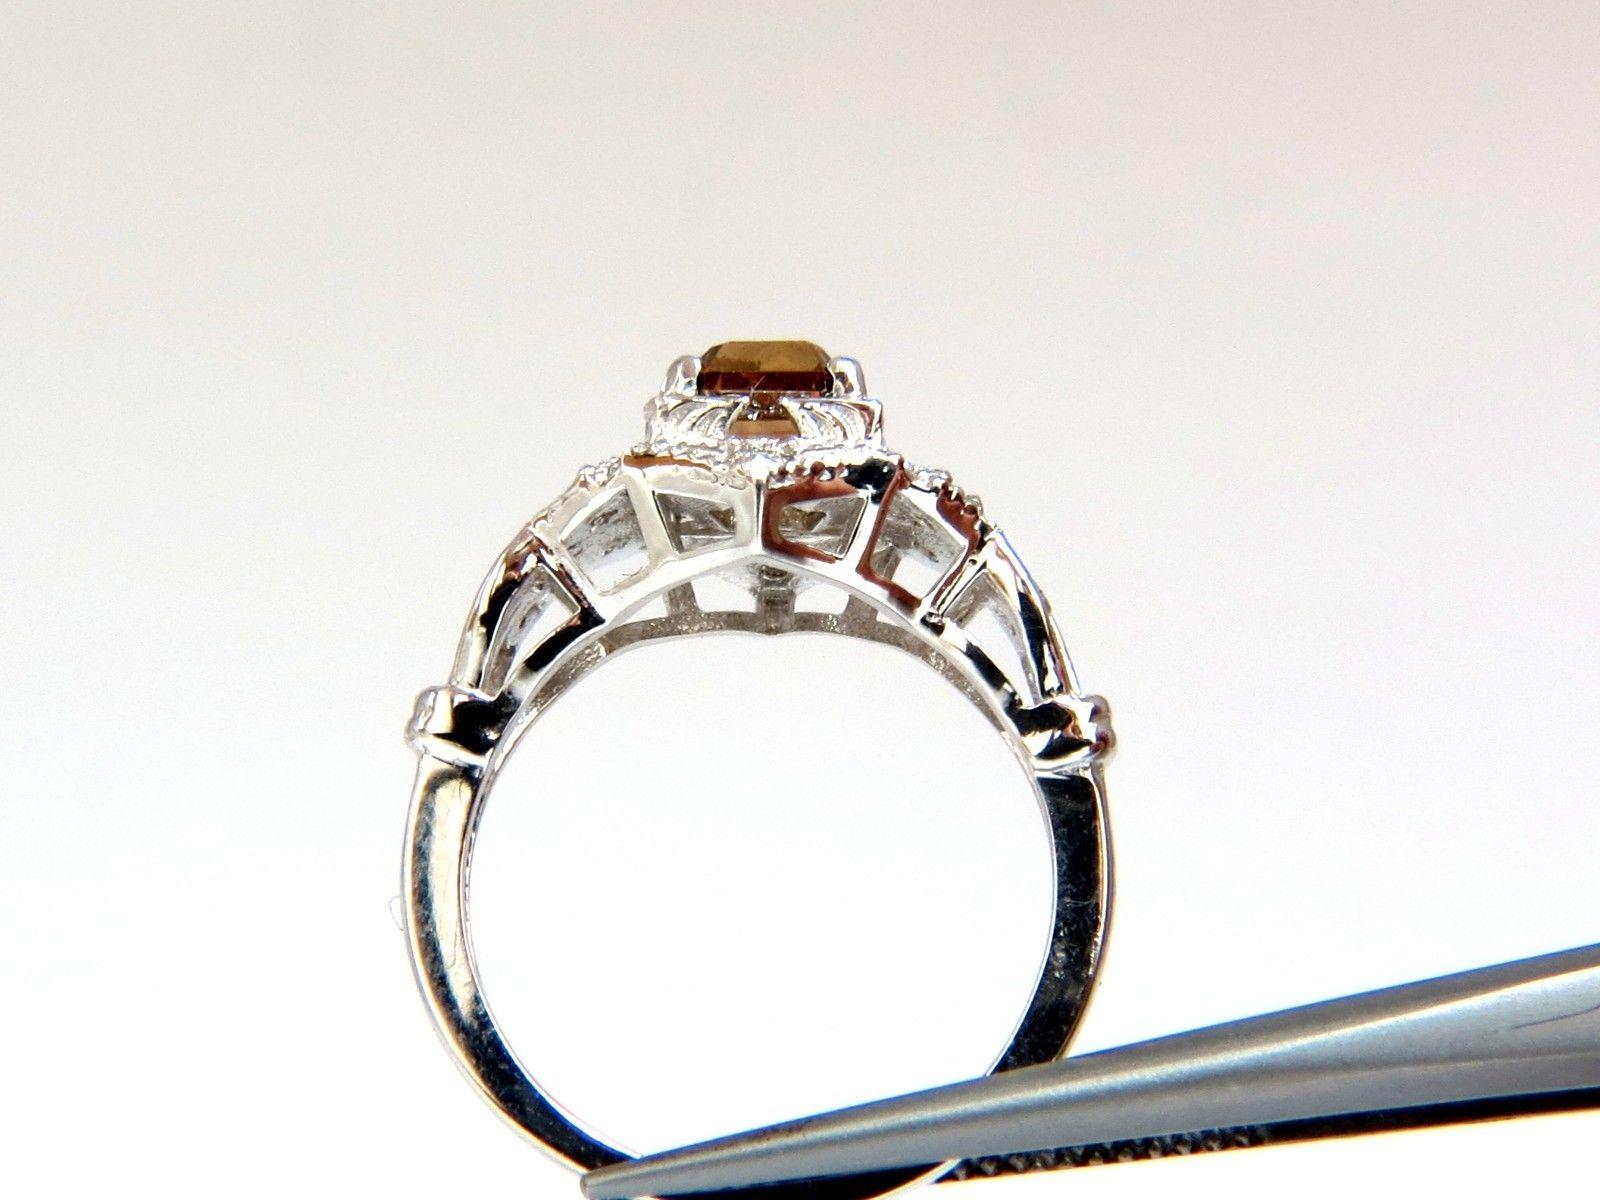 1.39 Carat Natural Fancy Brown Emerald Cut Diamond Ring VS2 Victorian Deco In New Condition For Sale In New York, NY